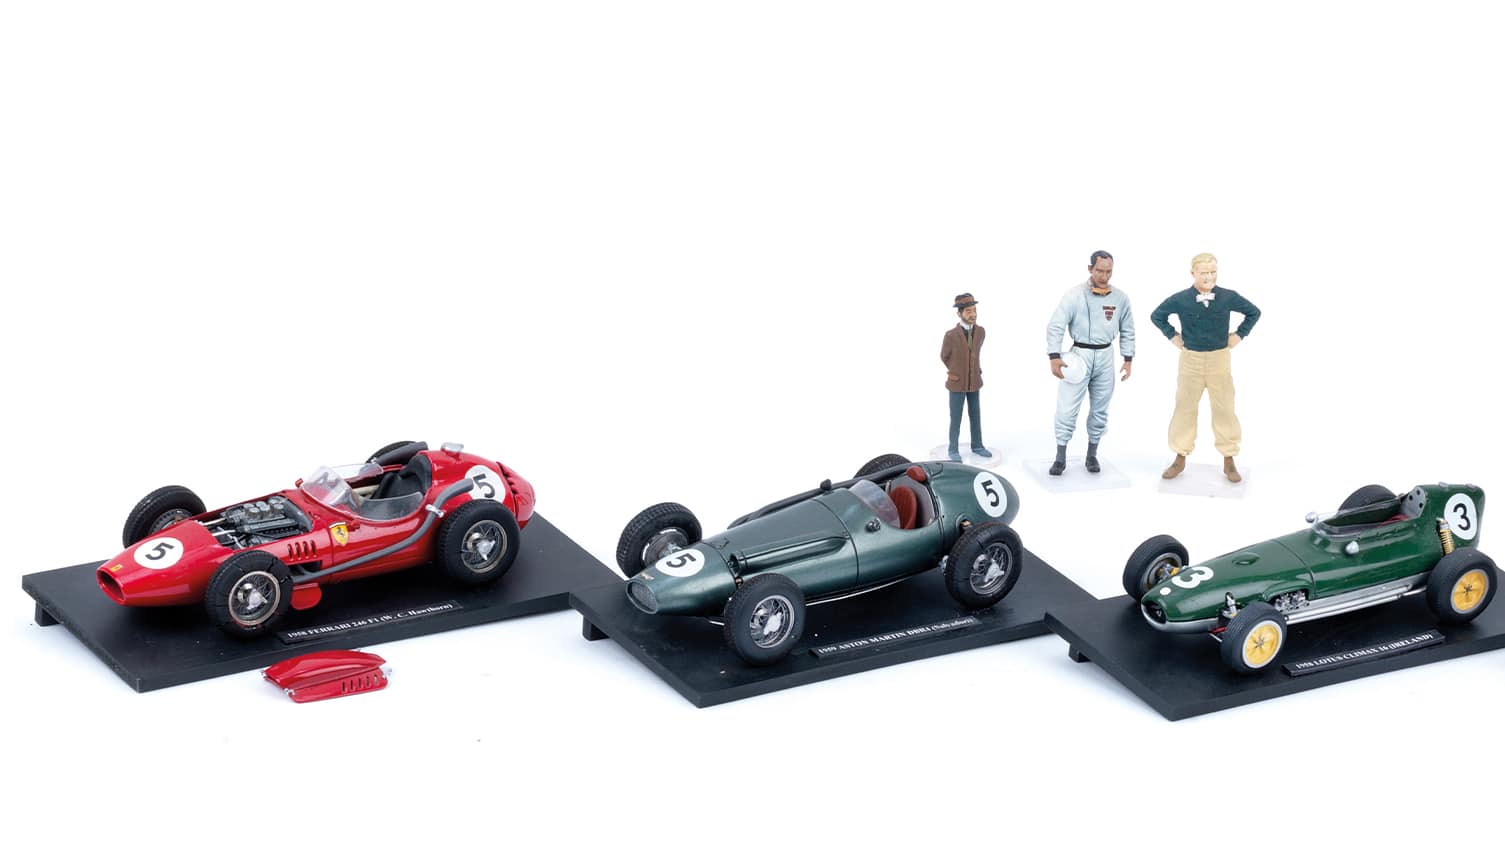 Model cars with driver figurines